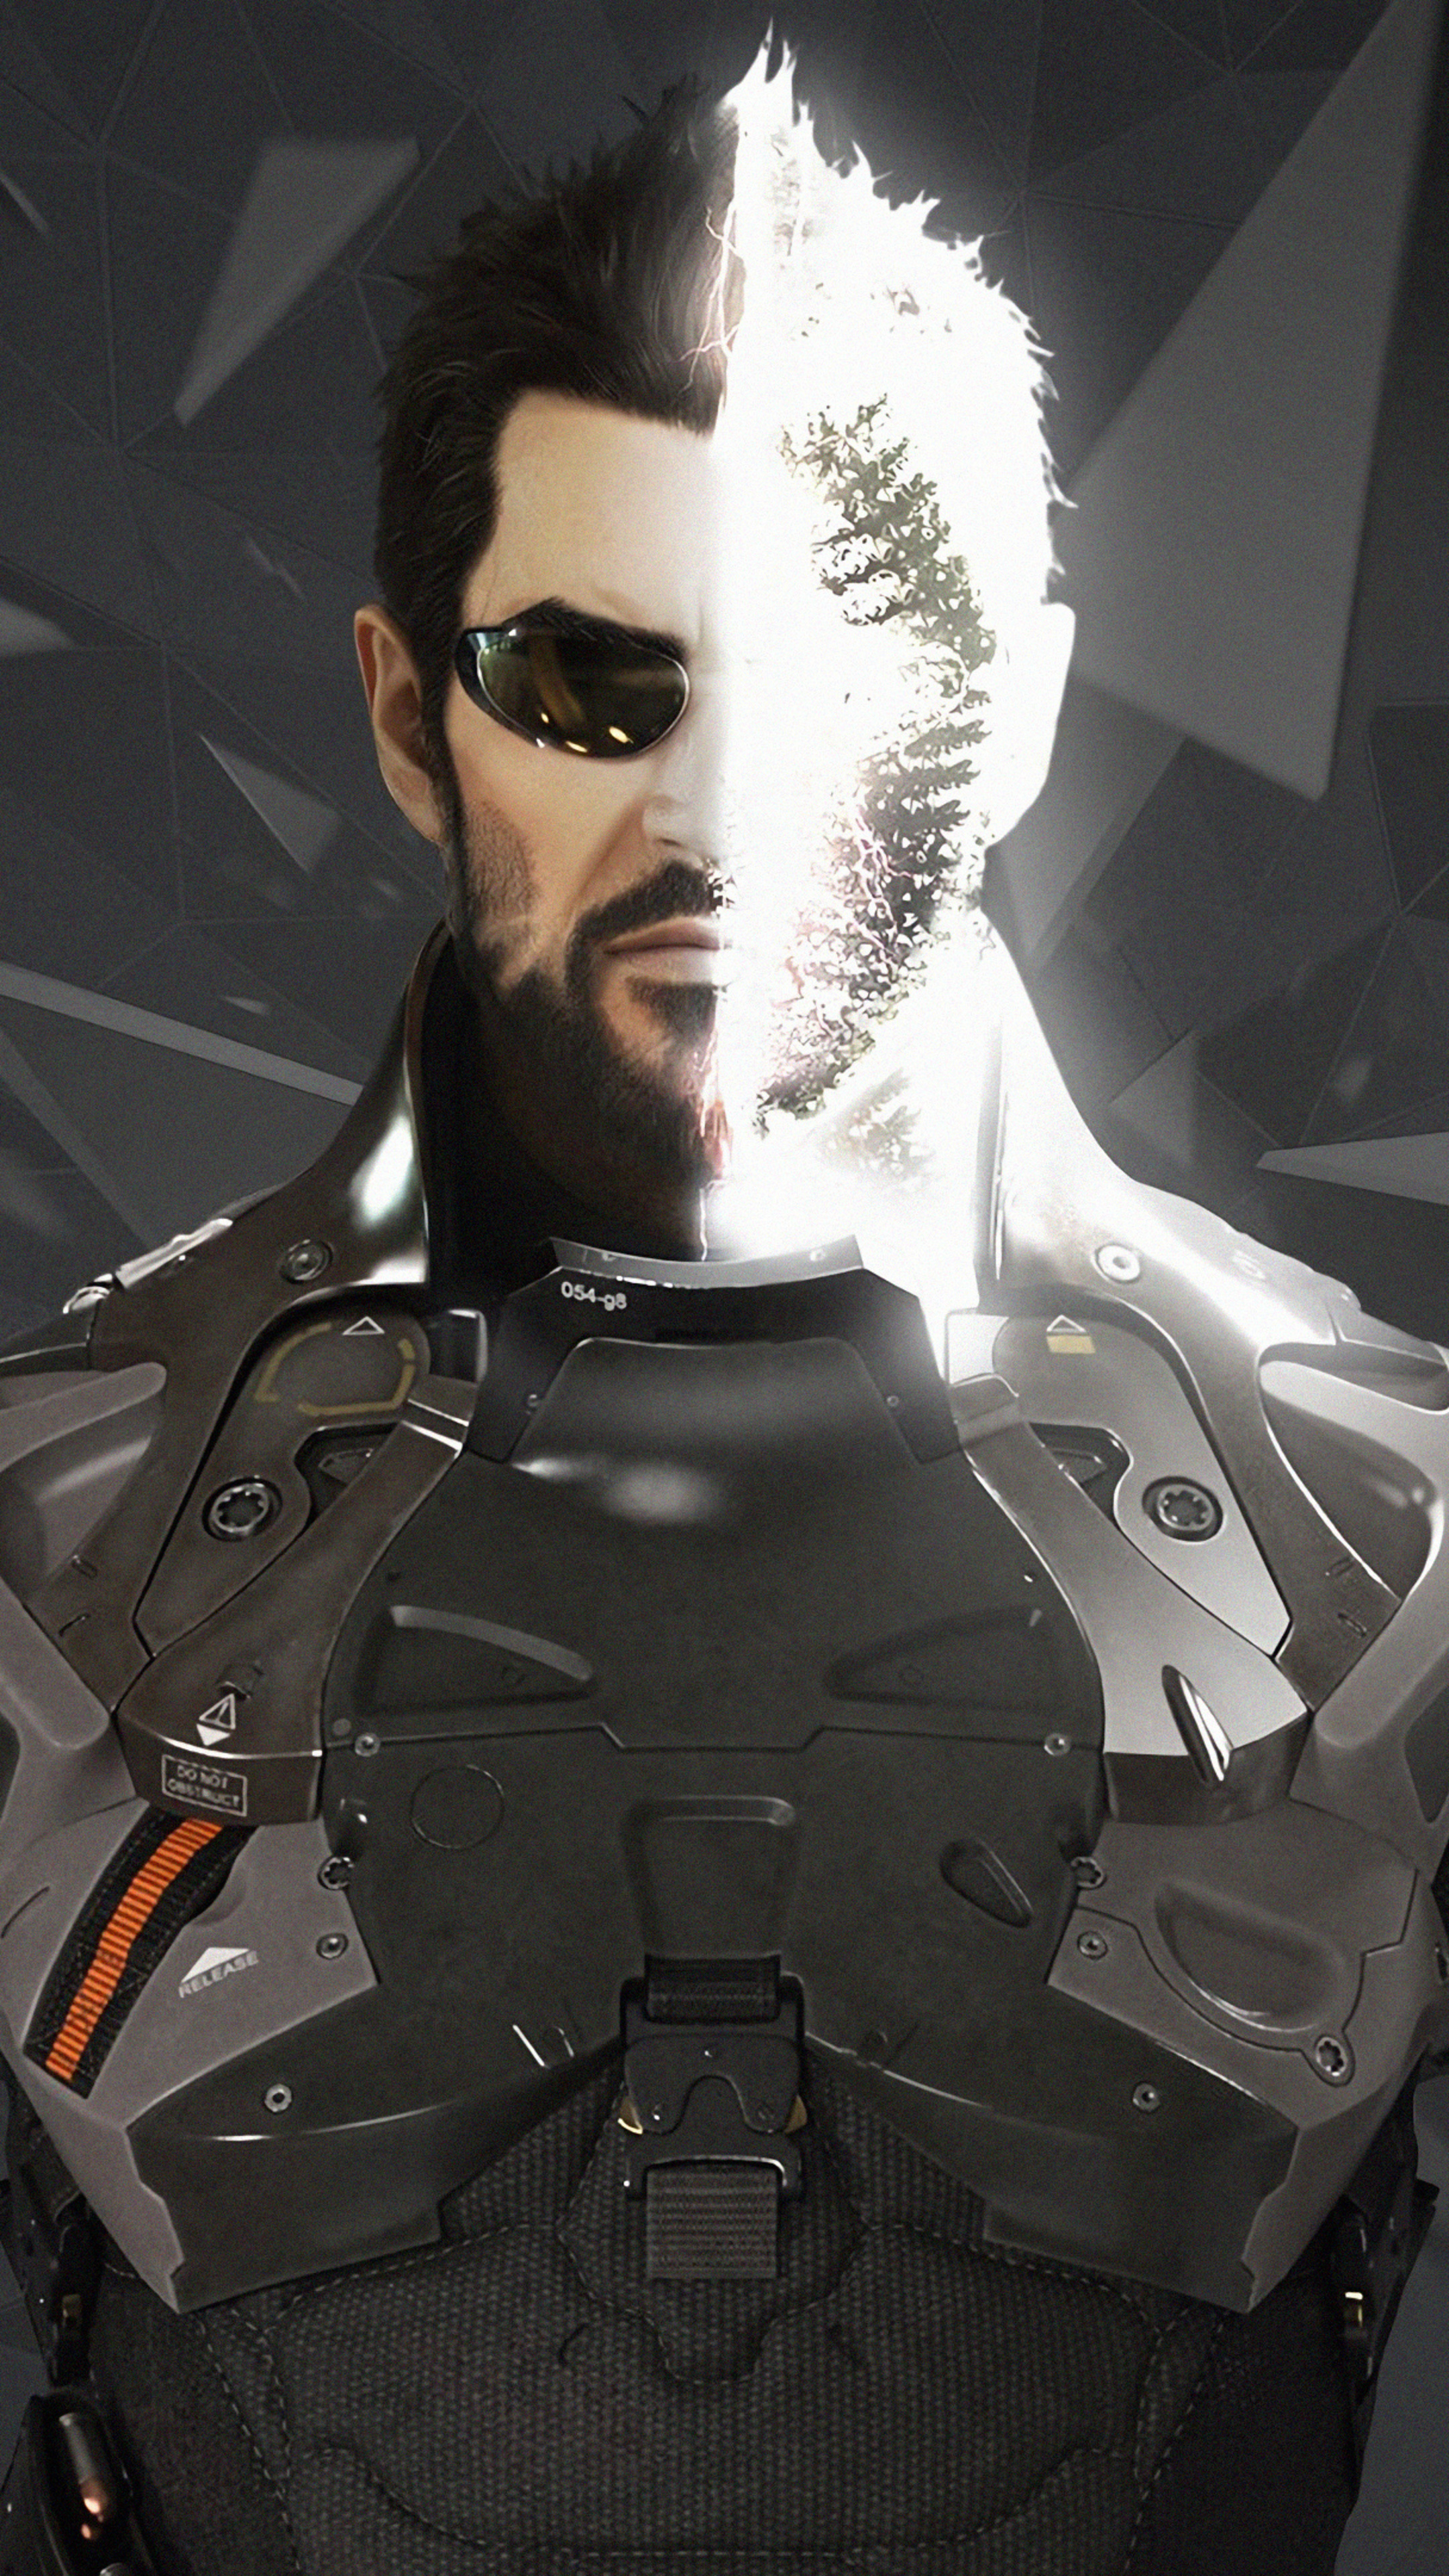 Deus Ex Mankind Video Game 4k Sony Xperia X, XZ, Z5 Premium HD 4k Wallpapers, Images, Backgrounds, Photos and Pictures 2160x3840